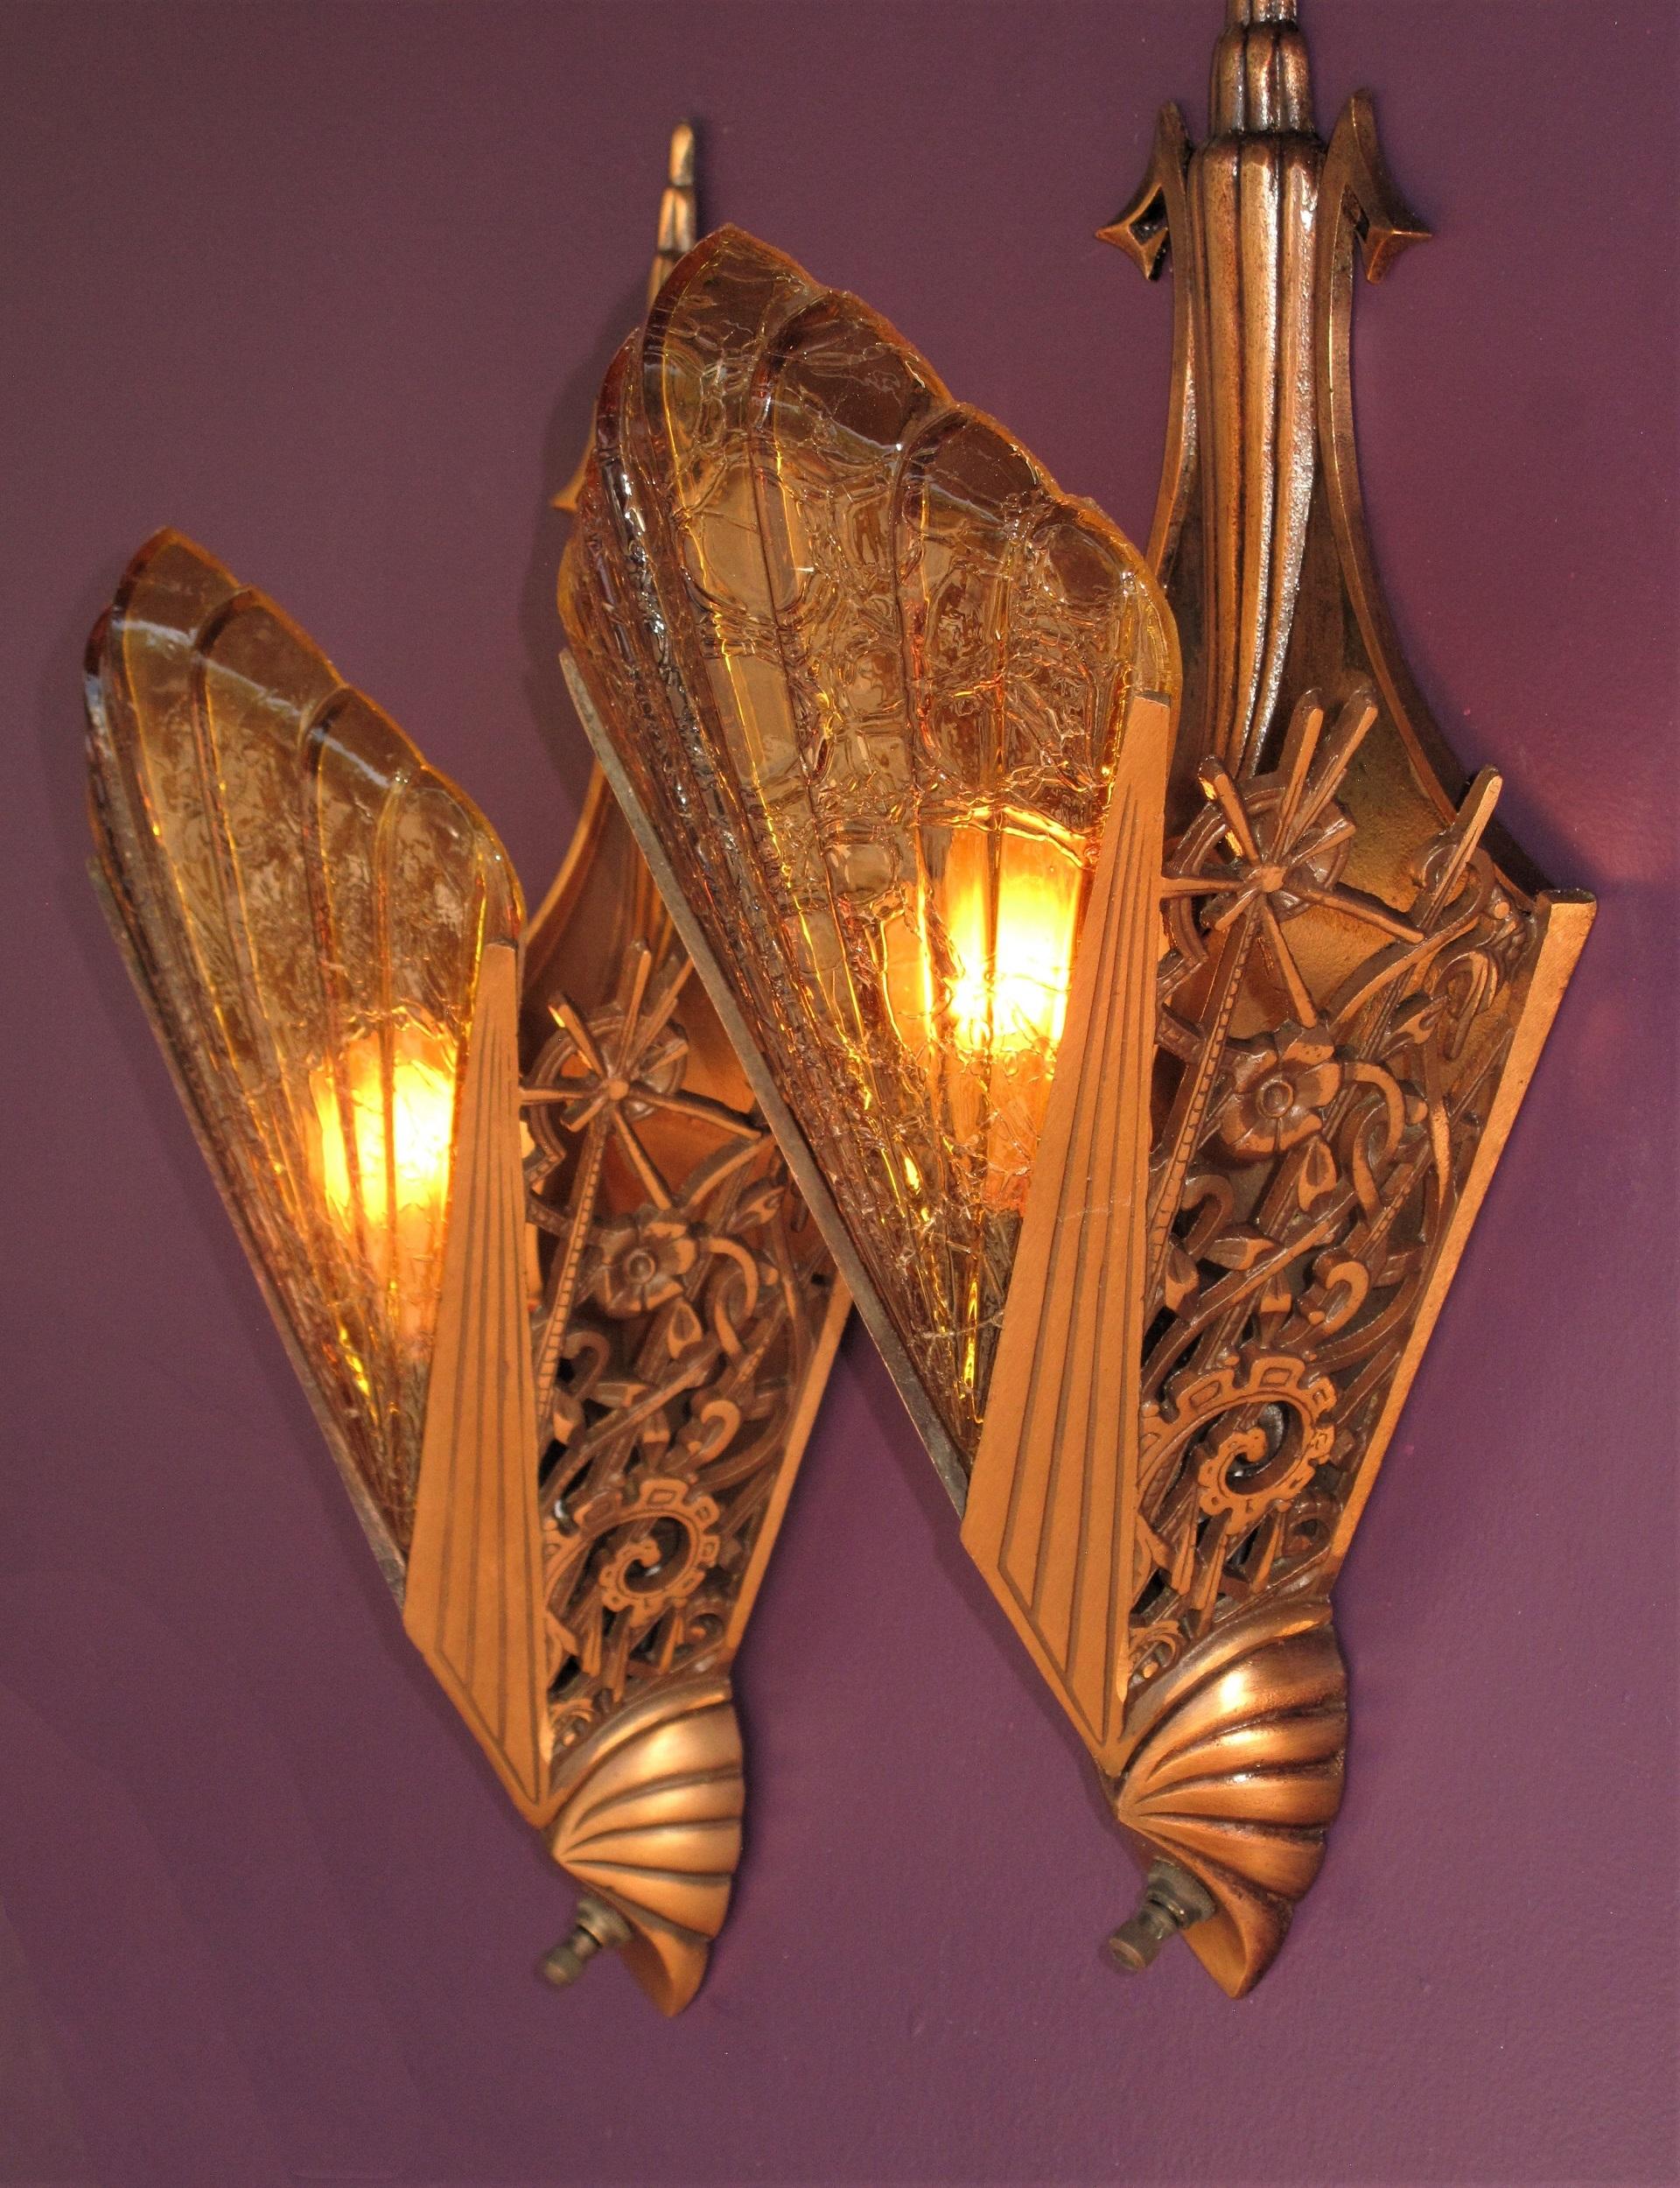 Ultra Deco 30s Pr Bronze Slip Shade Sconces w/ Honey colored shades priced pair For Sale 2